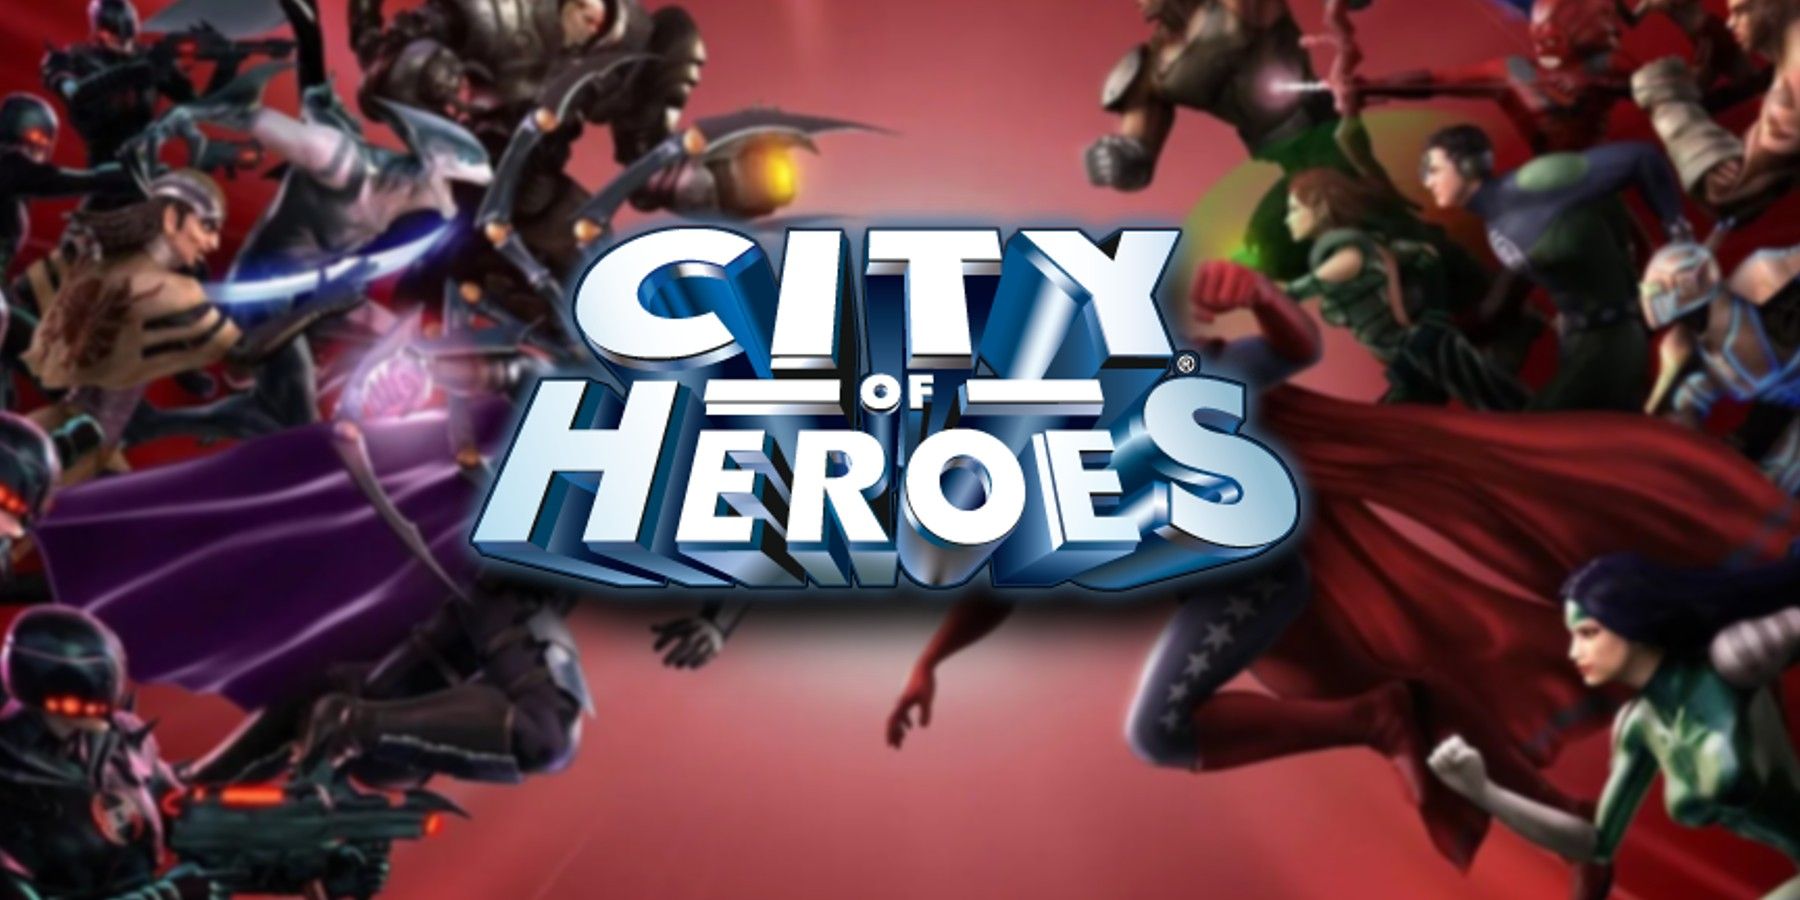 city-of-heroes-logo-blurred-background